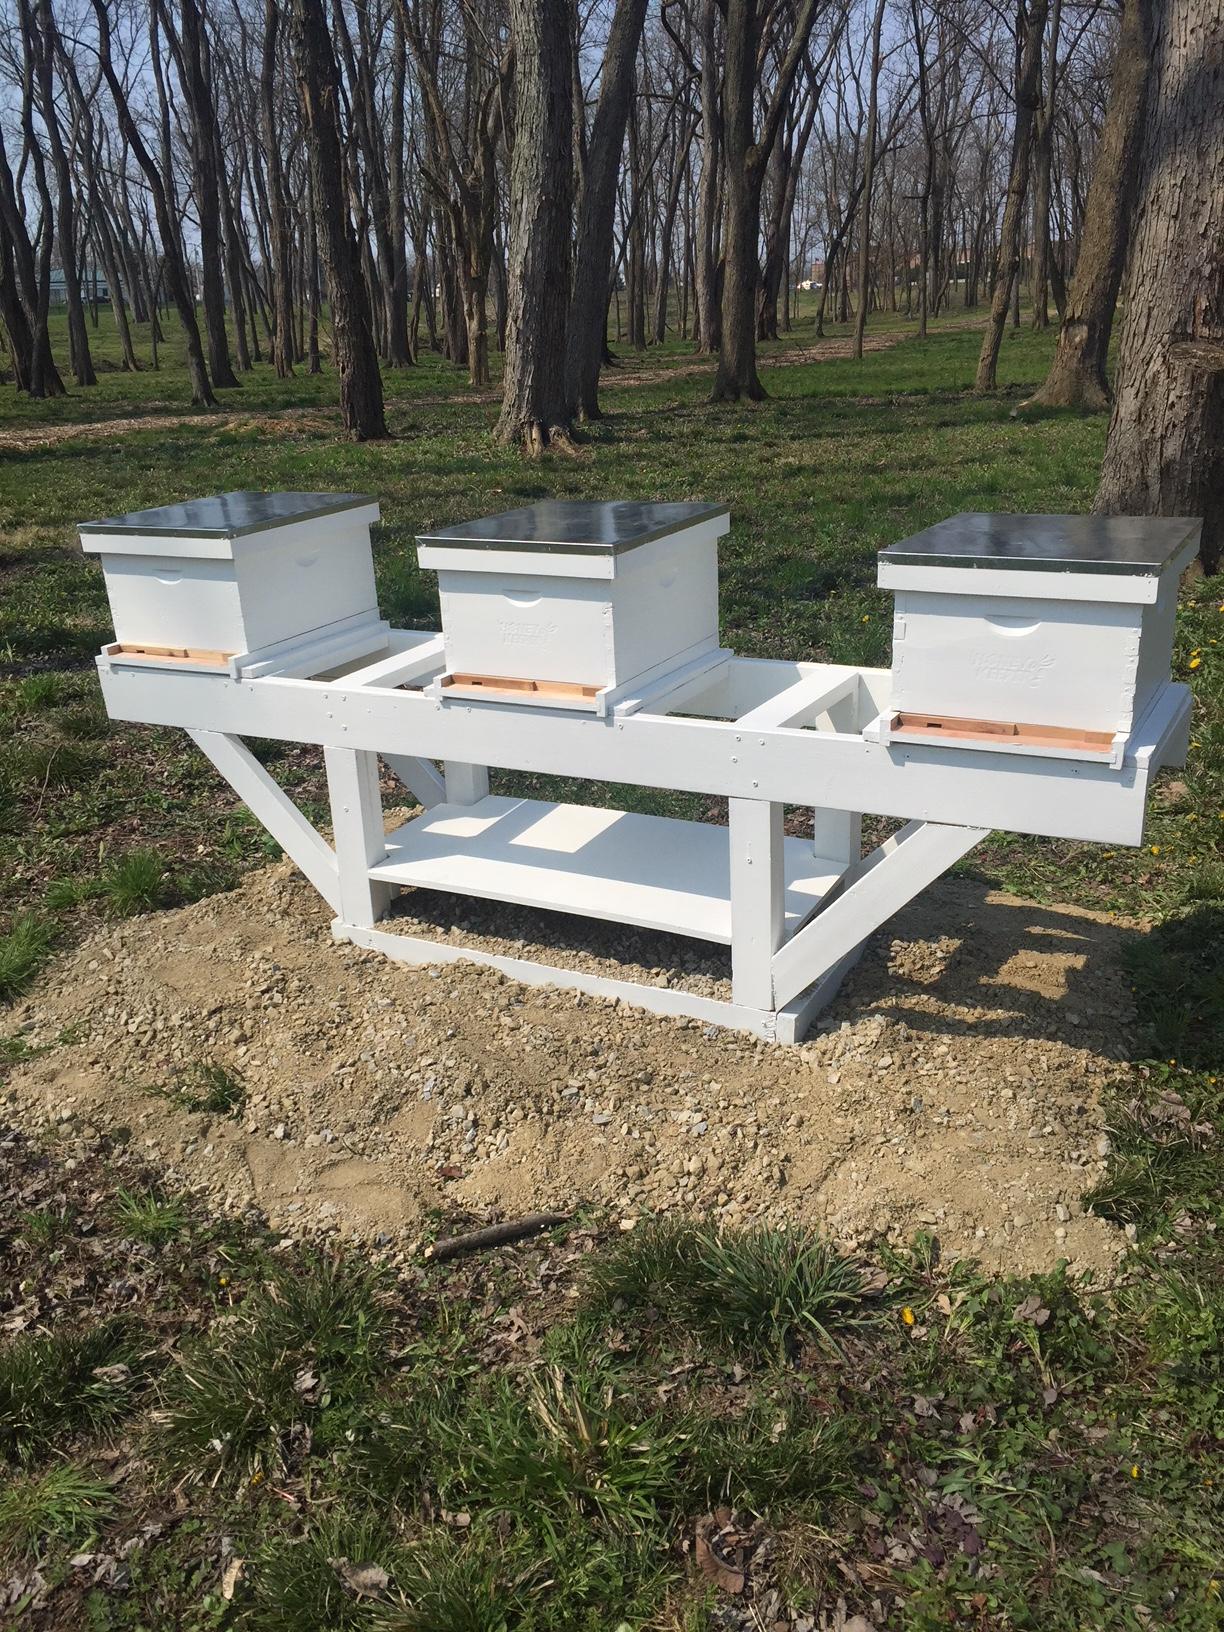 Act Small, Think Big: The Beginning of a Beekeeping Journey at SugarCreek